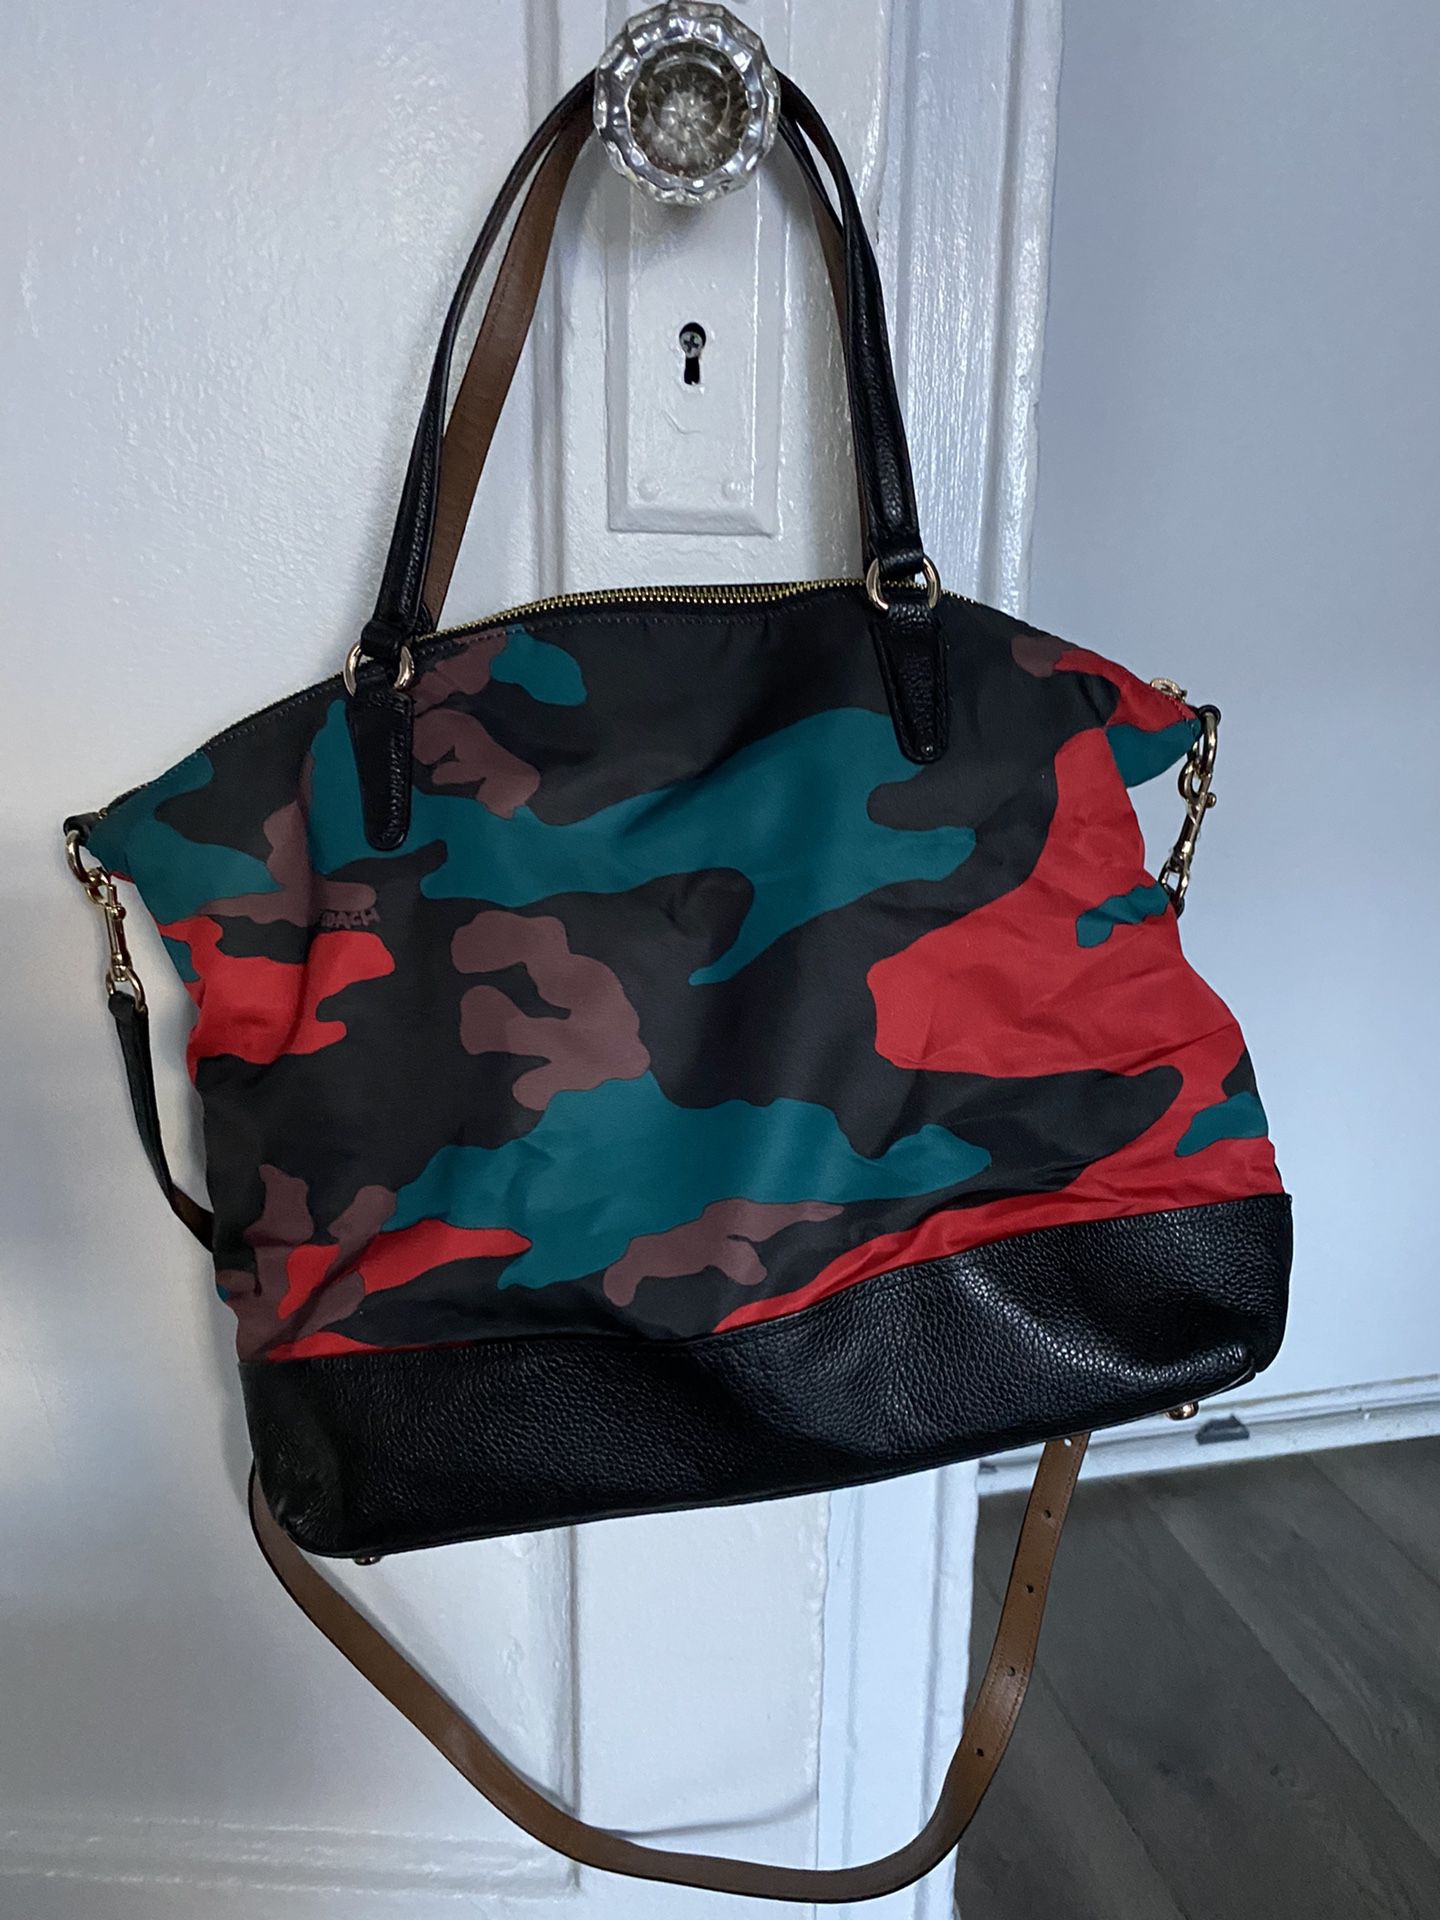 Coach Lacey Crossbody Bag for Sale in Queens, NY - OfferUp